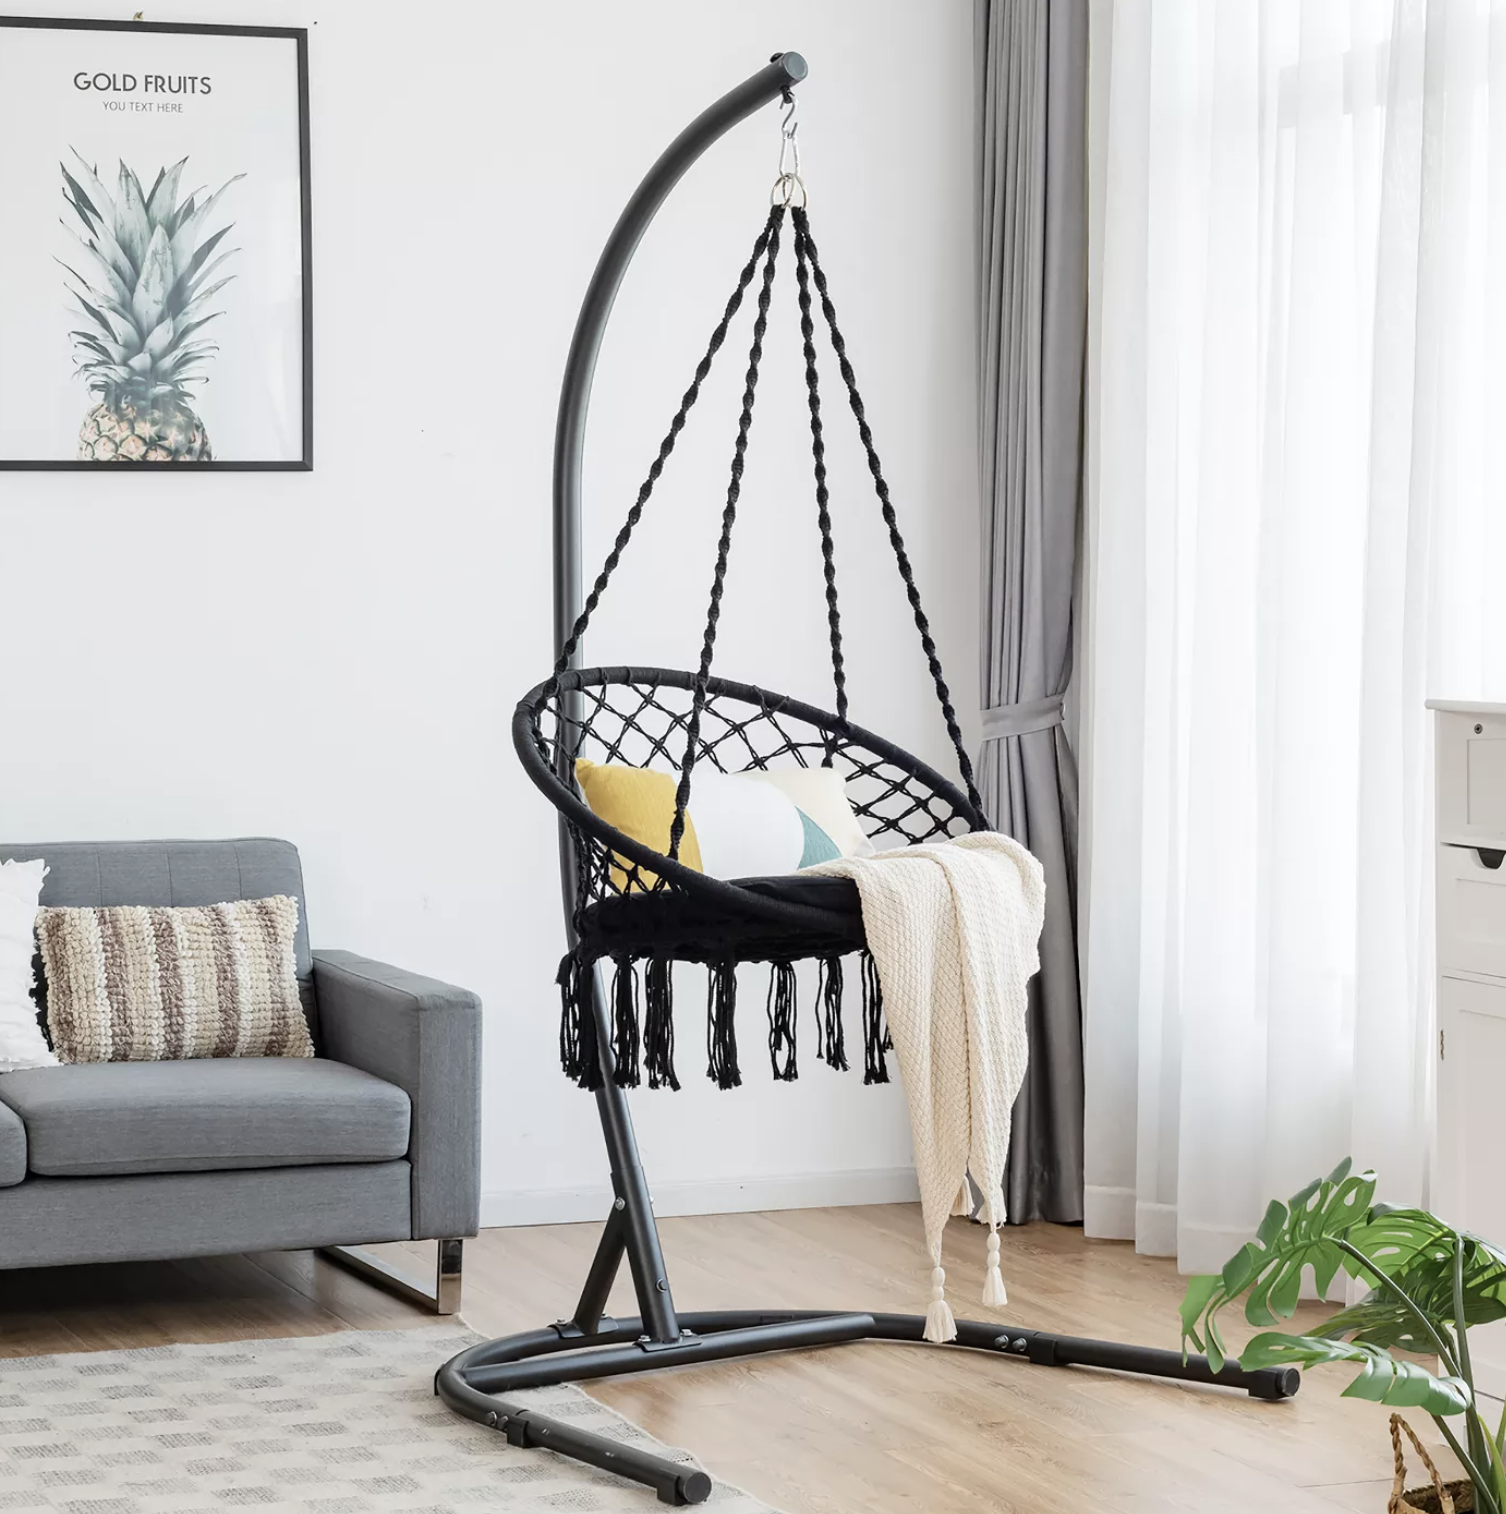 the black hanging hammock in a living room